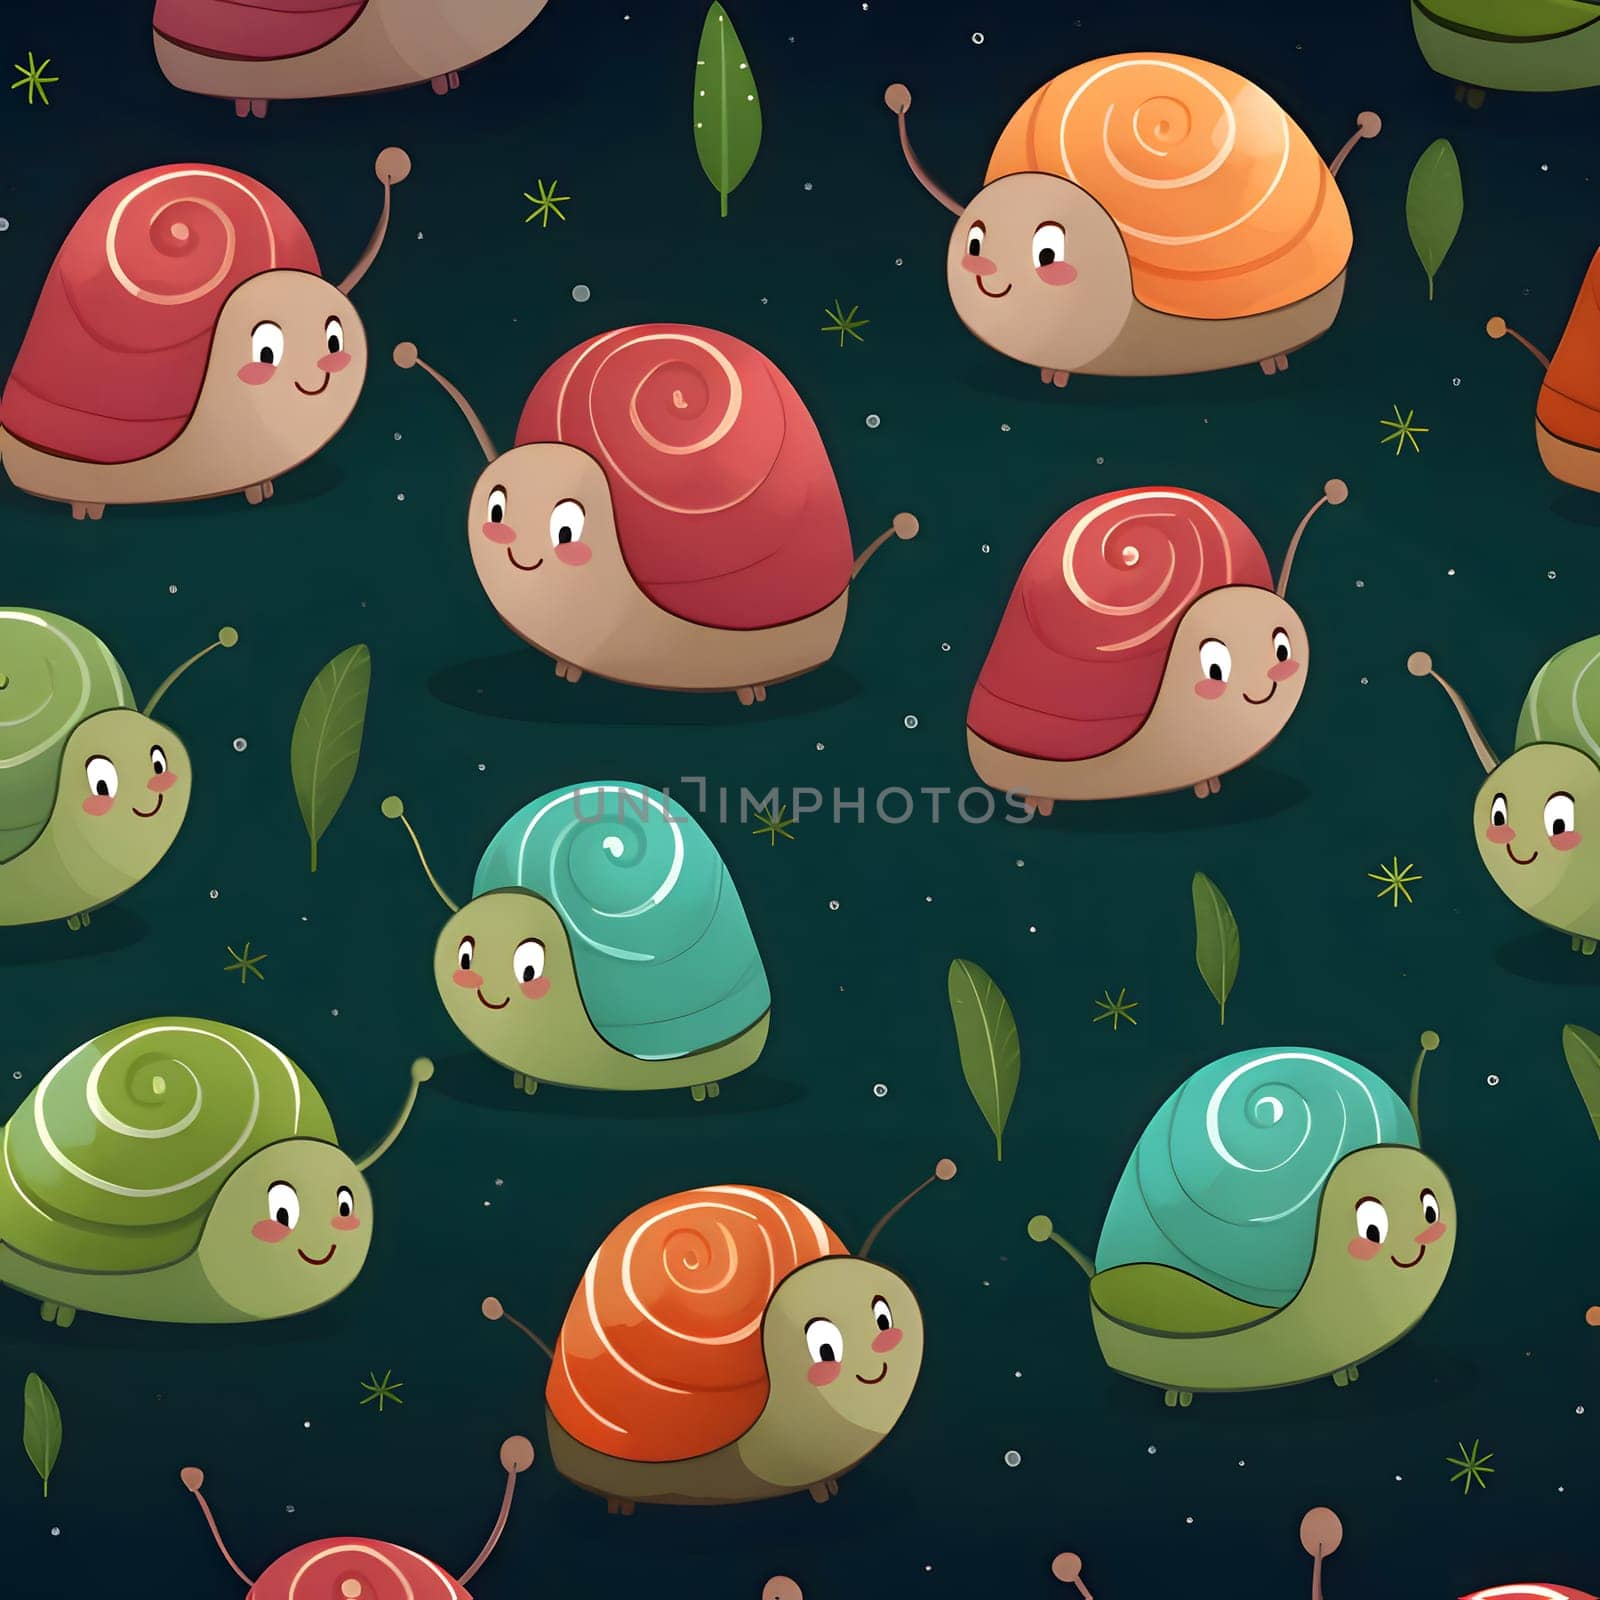 Patterns and banners backgrounds: Seamless pattern with cute snails on dark green background.